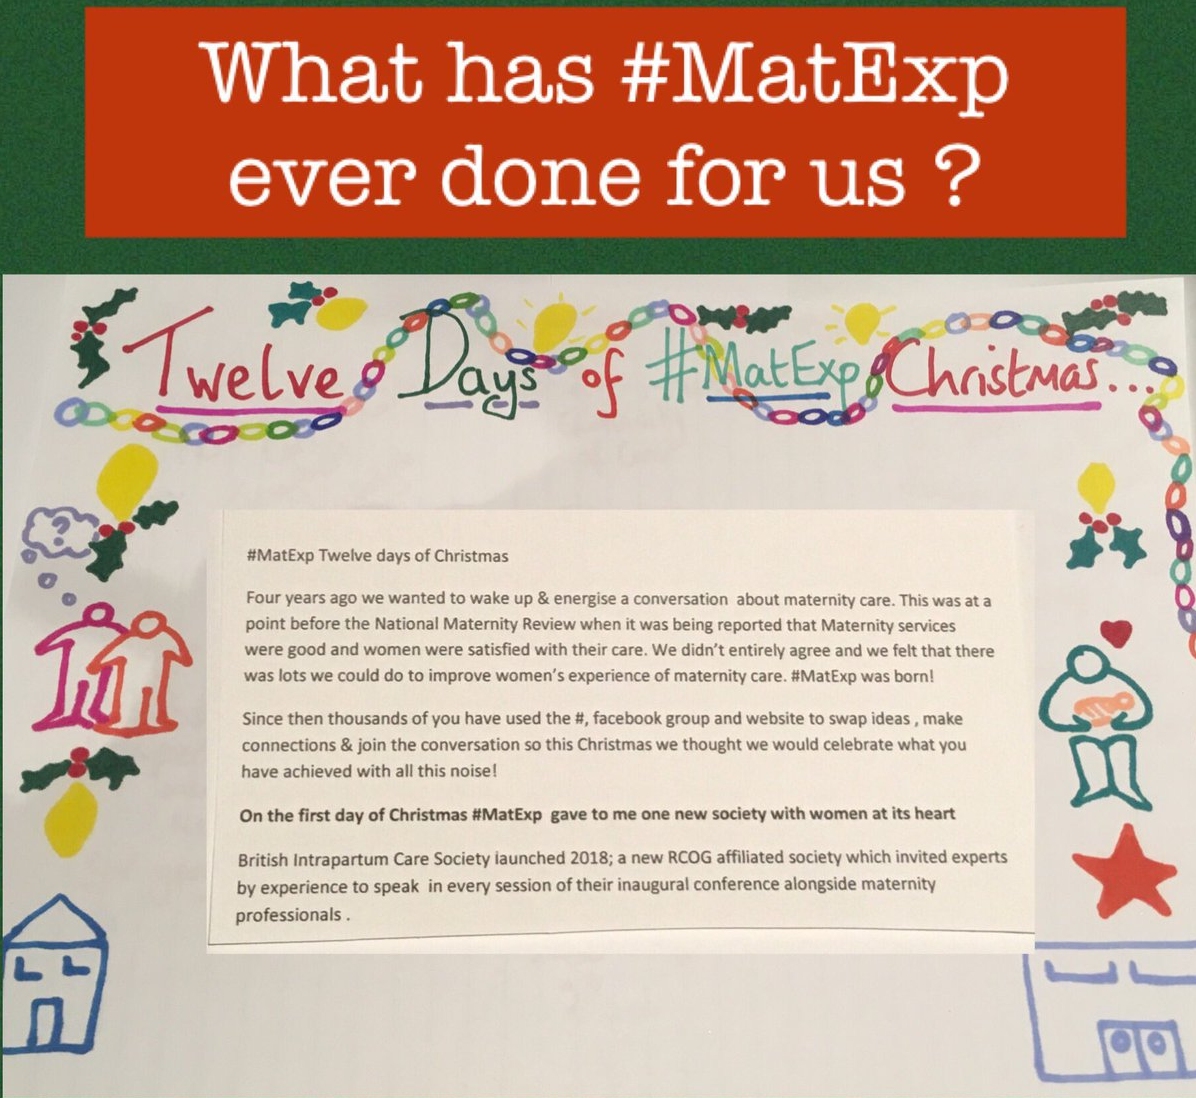 MatExp 12 days of Christmas Day 1